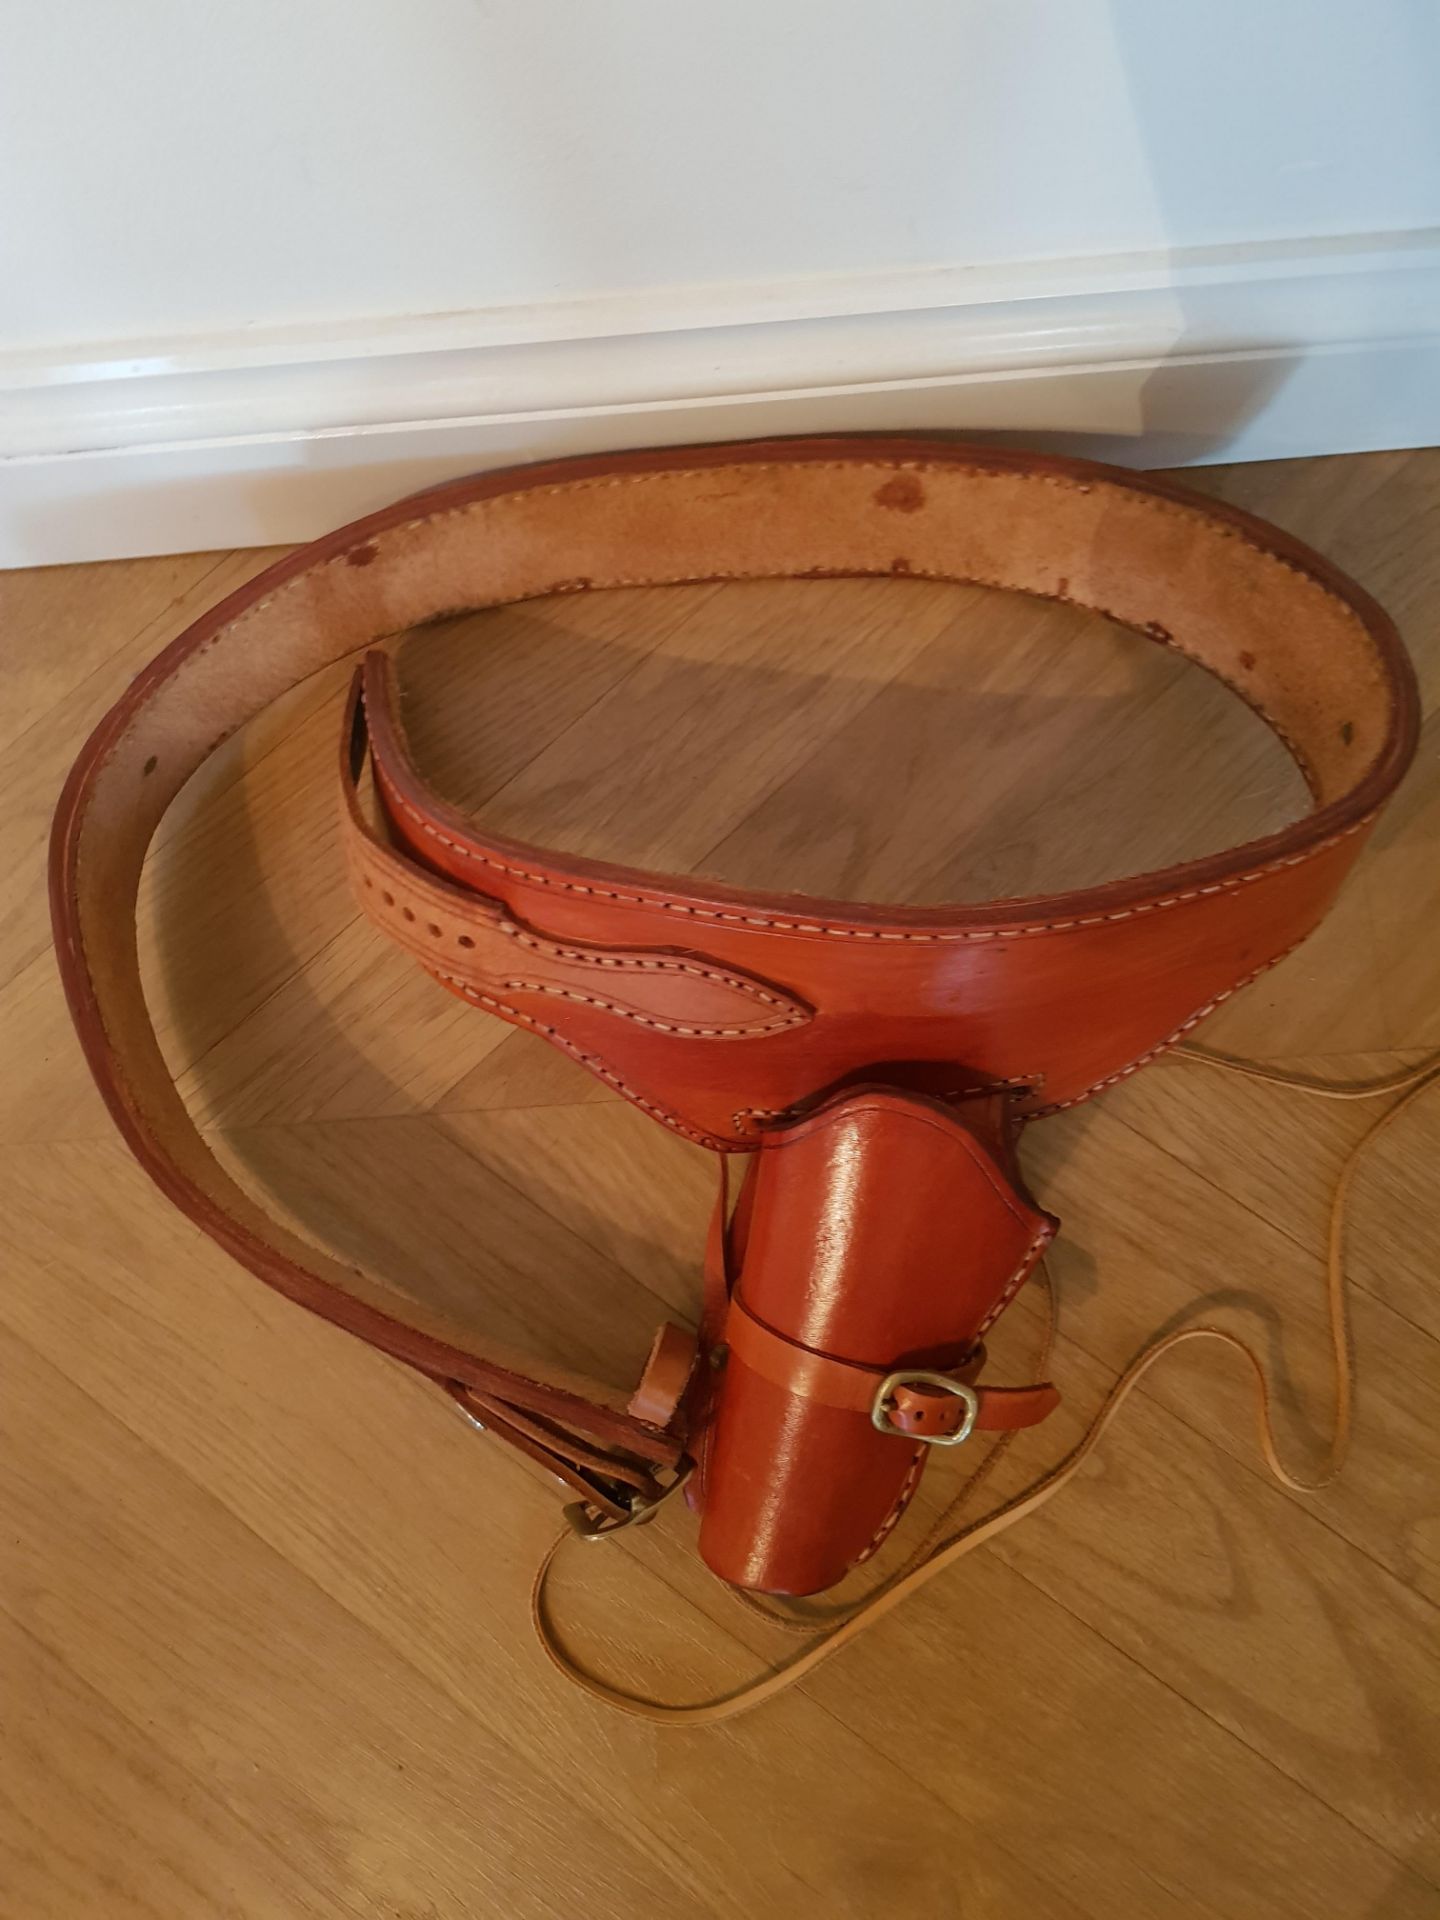 Tan Leather Western Gun Belt with Holster